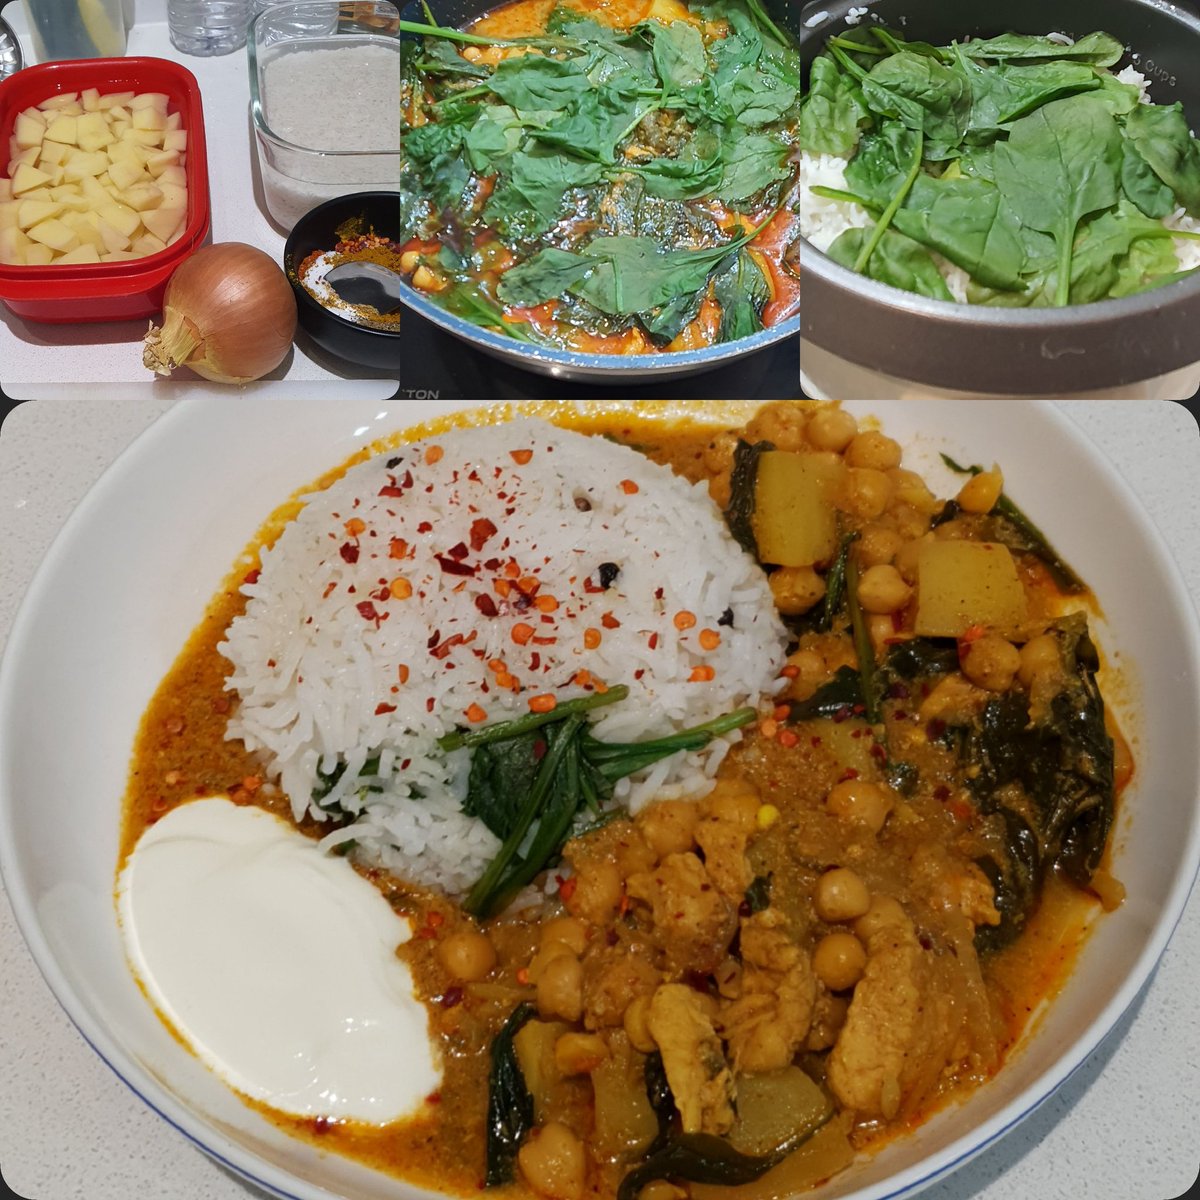 First propa cooked Evening meal in 4months, 
#homemade #chieflife #homechef  #saturdaynitein #currynite #chickencurry  #eatclean #spinach  #spicy #chickpea #potato #healthy #fresh #spinachrice 
#steamedrice #mealprep #foodie
#foodporn